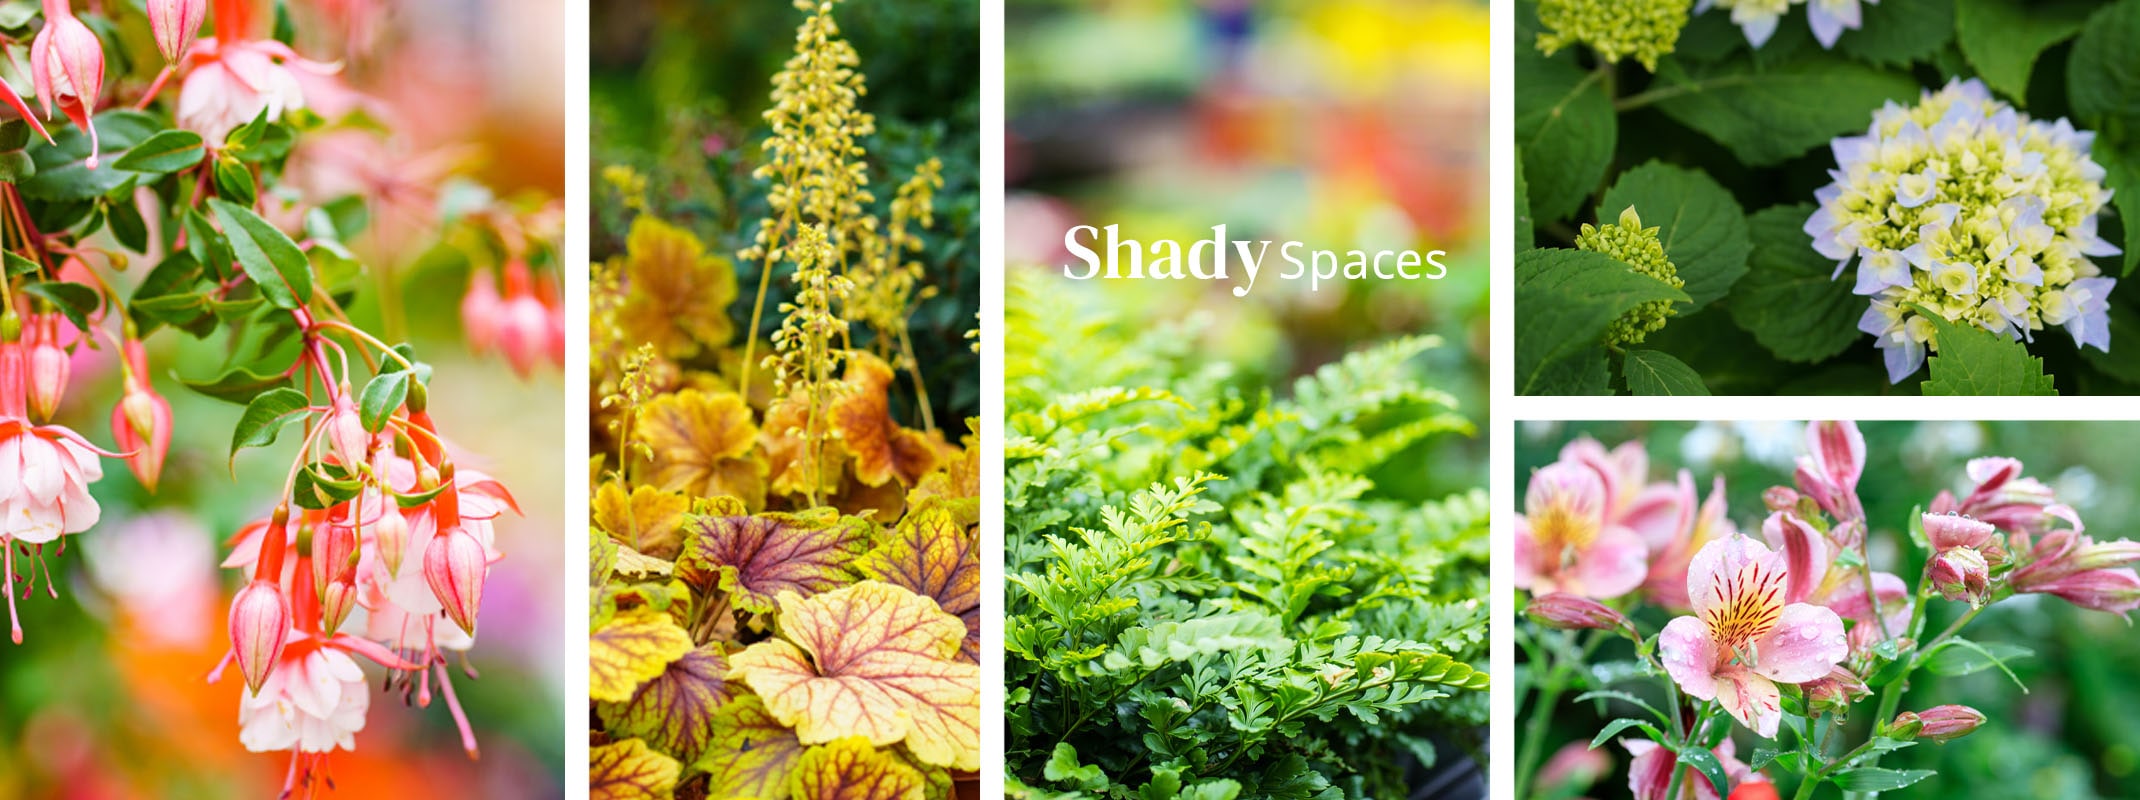 assorted plants that do well in shady areas of the garden with text on image that says shady spaces